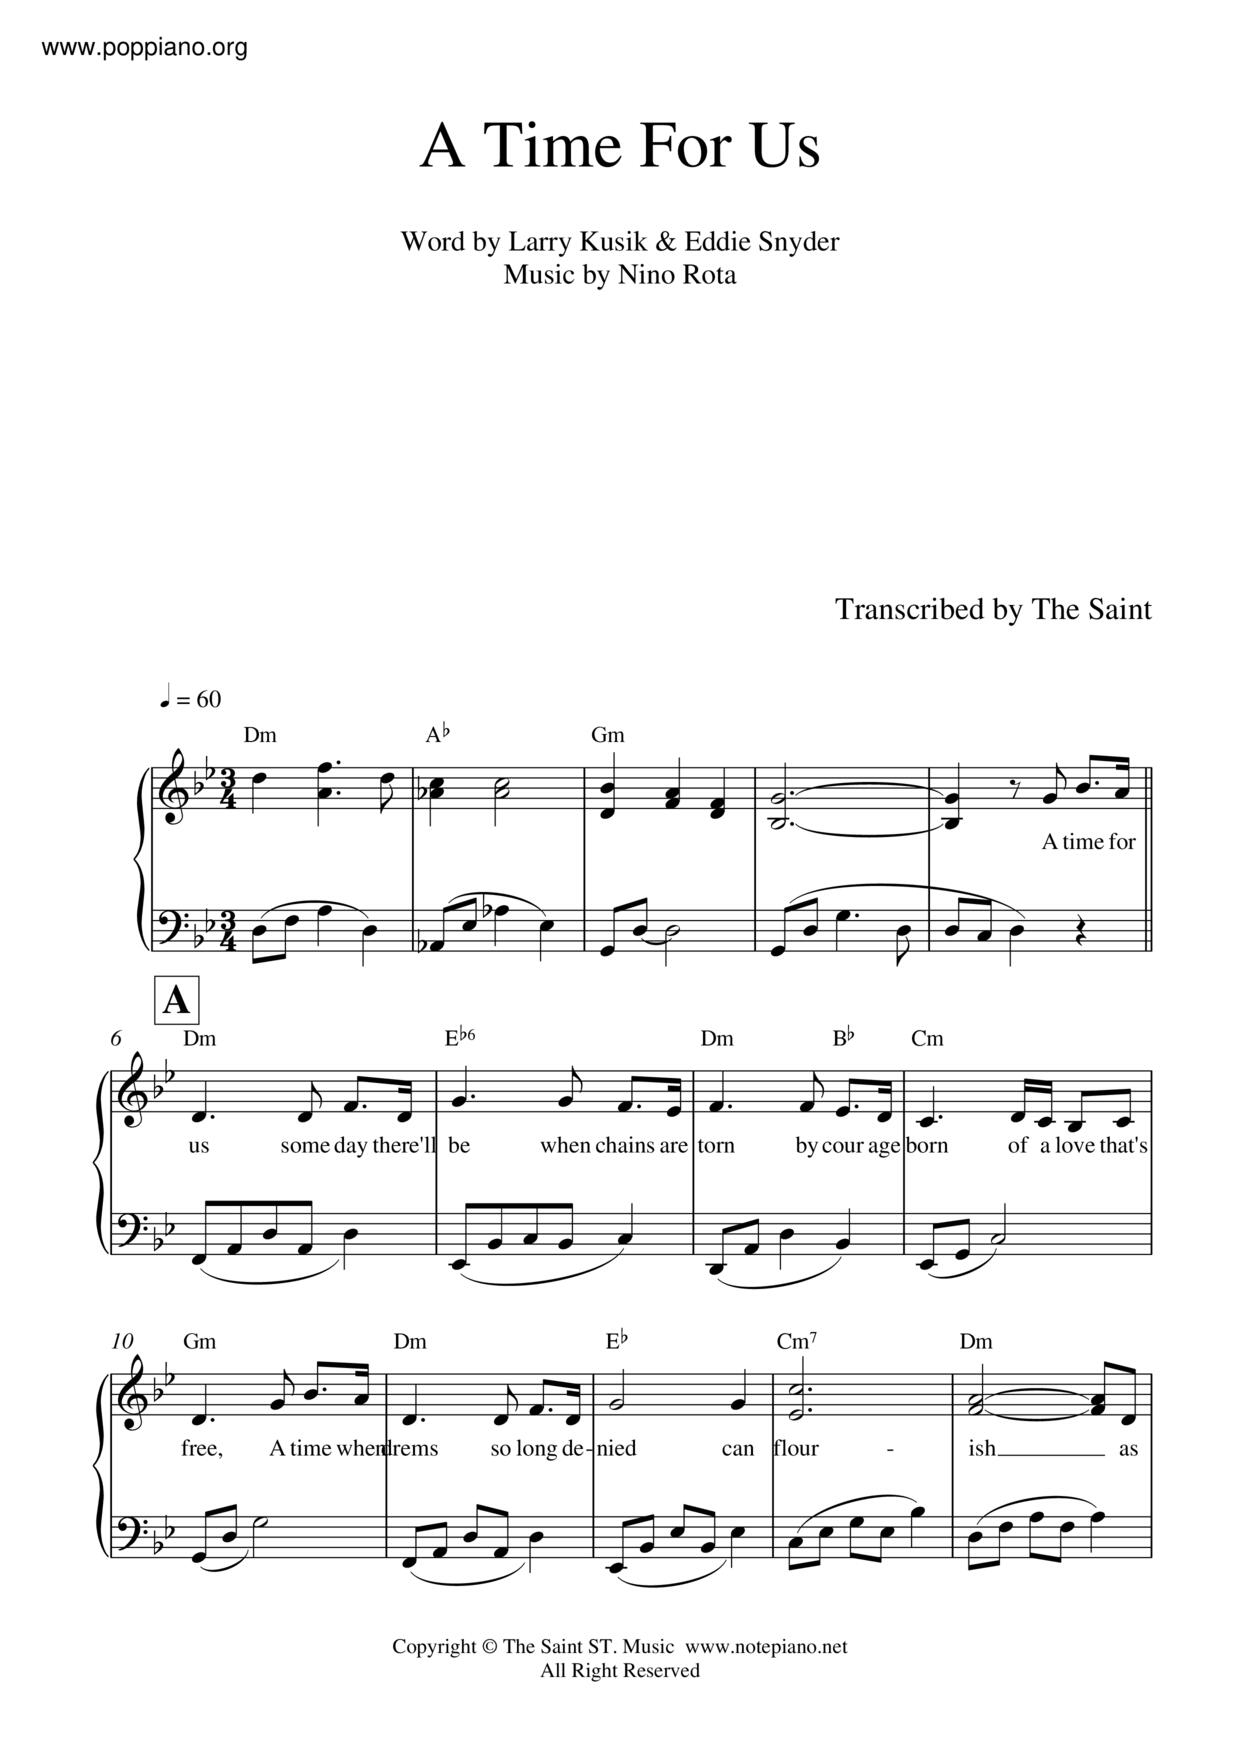 Romeo And Juliet - A Time For Us Score